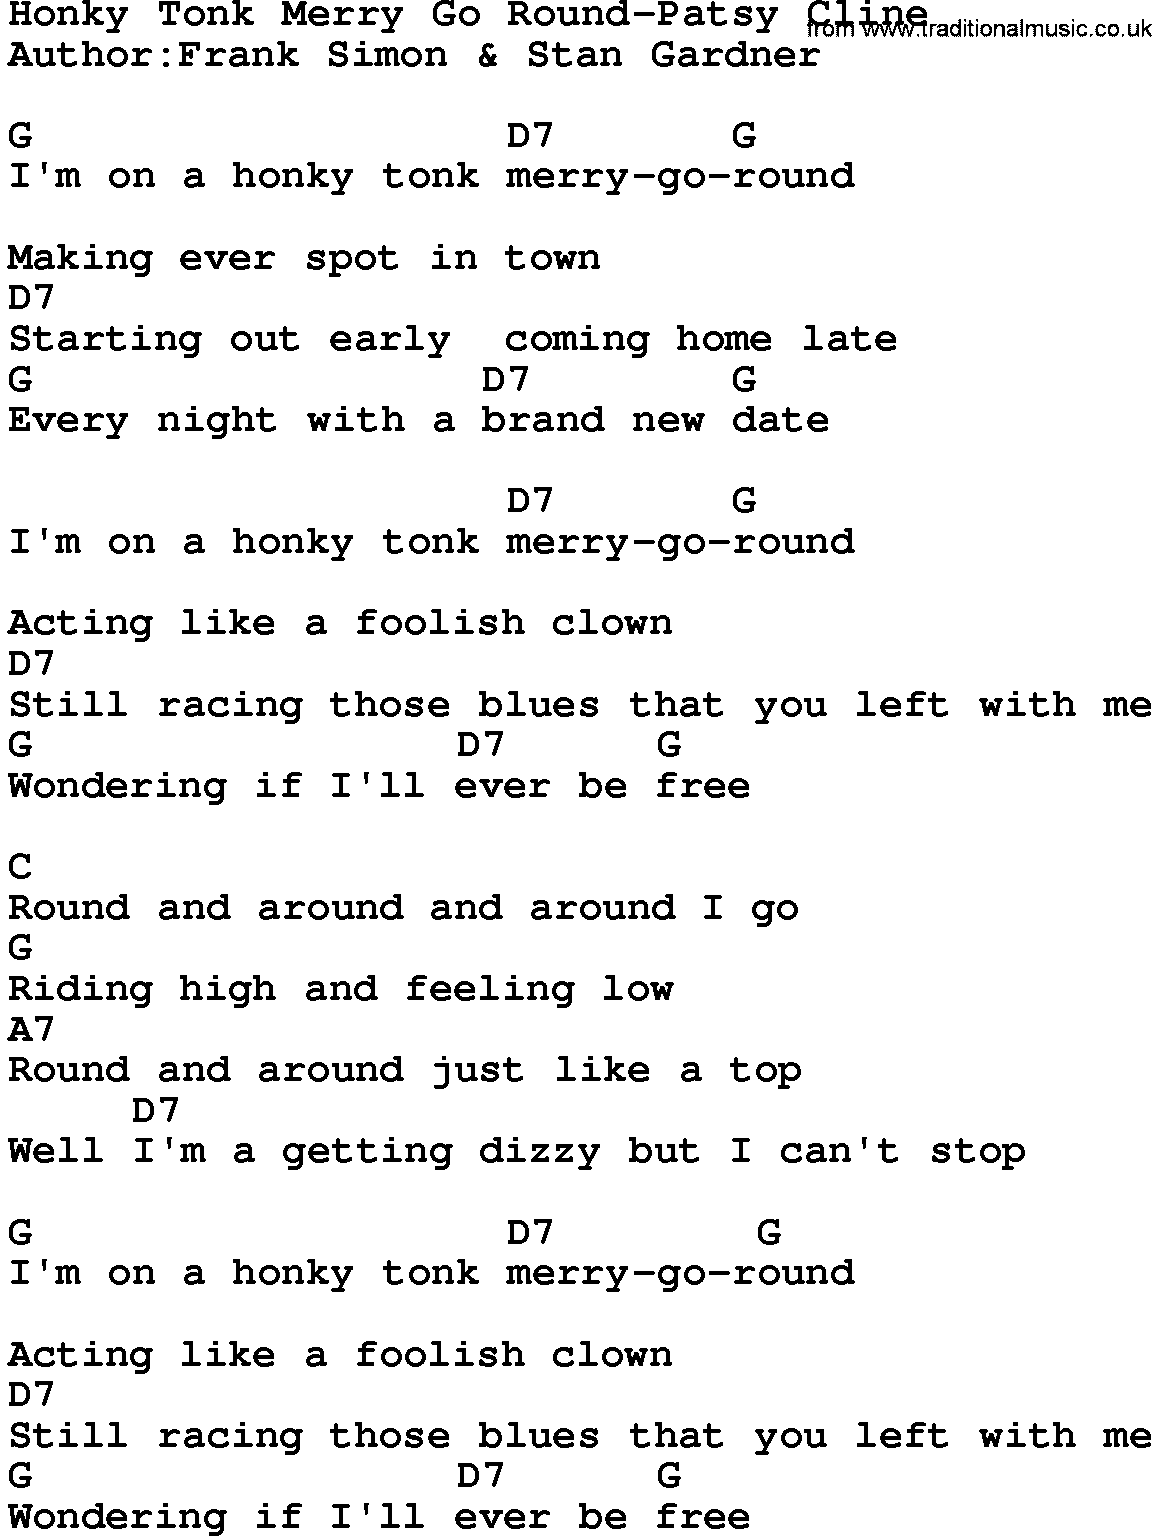 Country music song: Honky Tonk Merry Go Round-Patsy Cline lyrics and chords